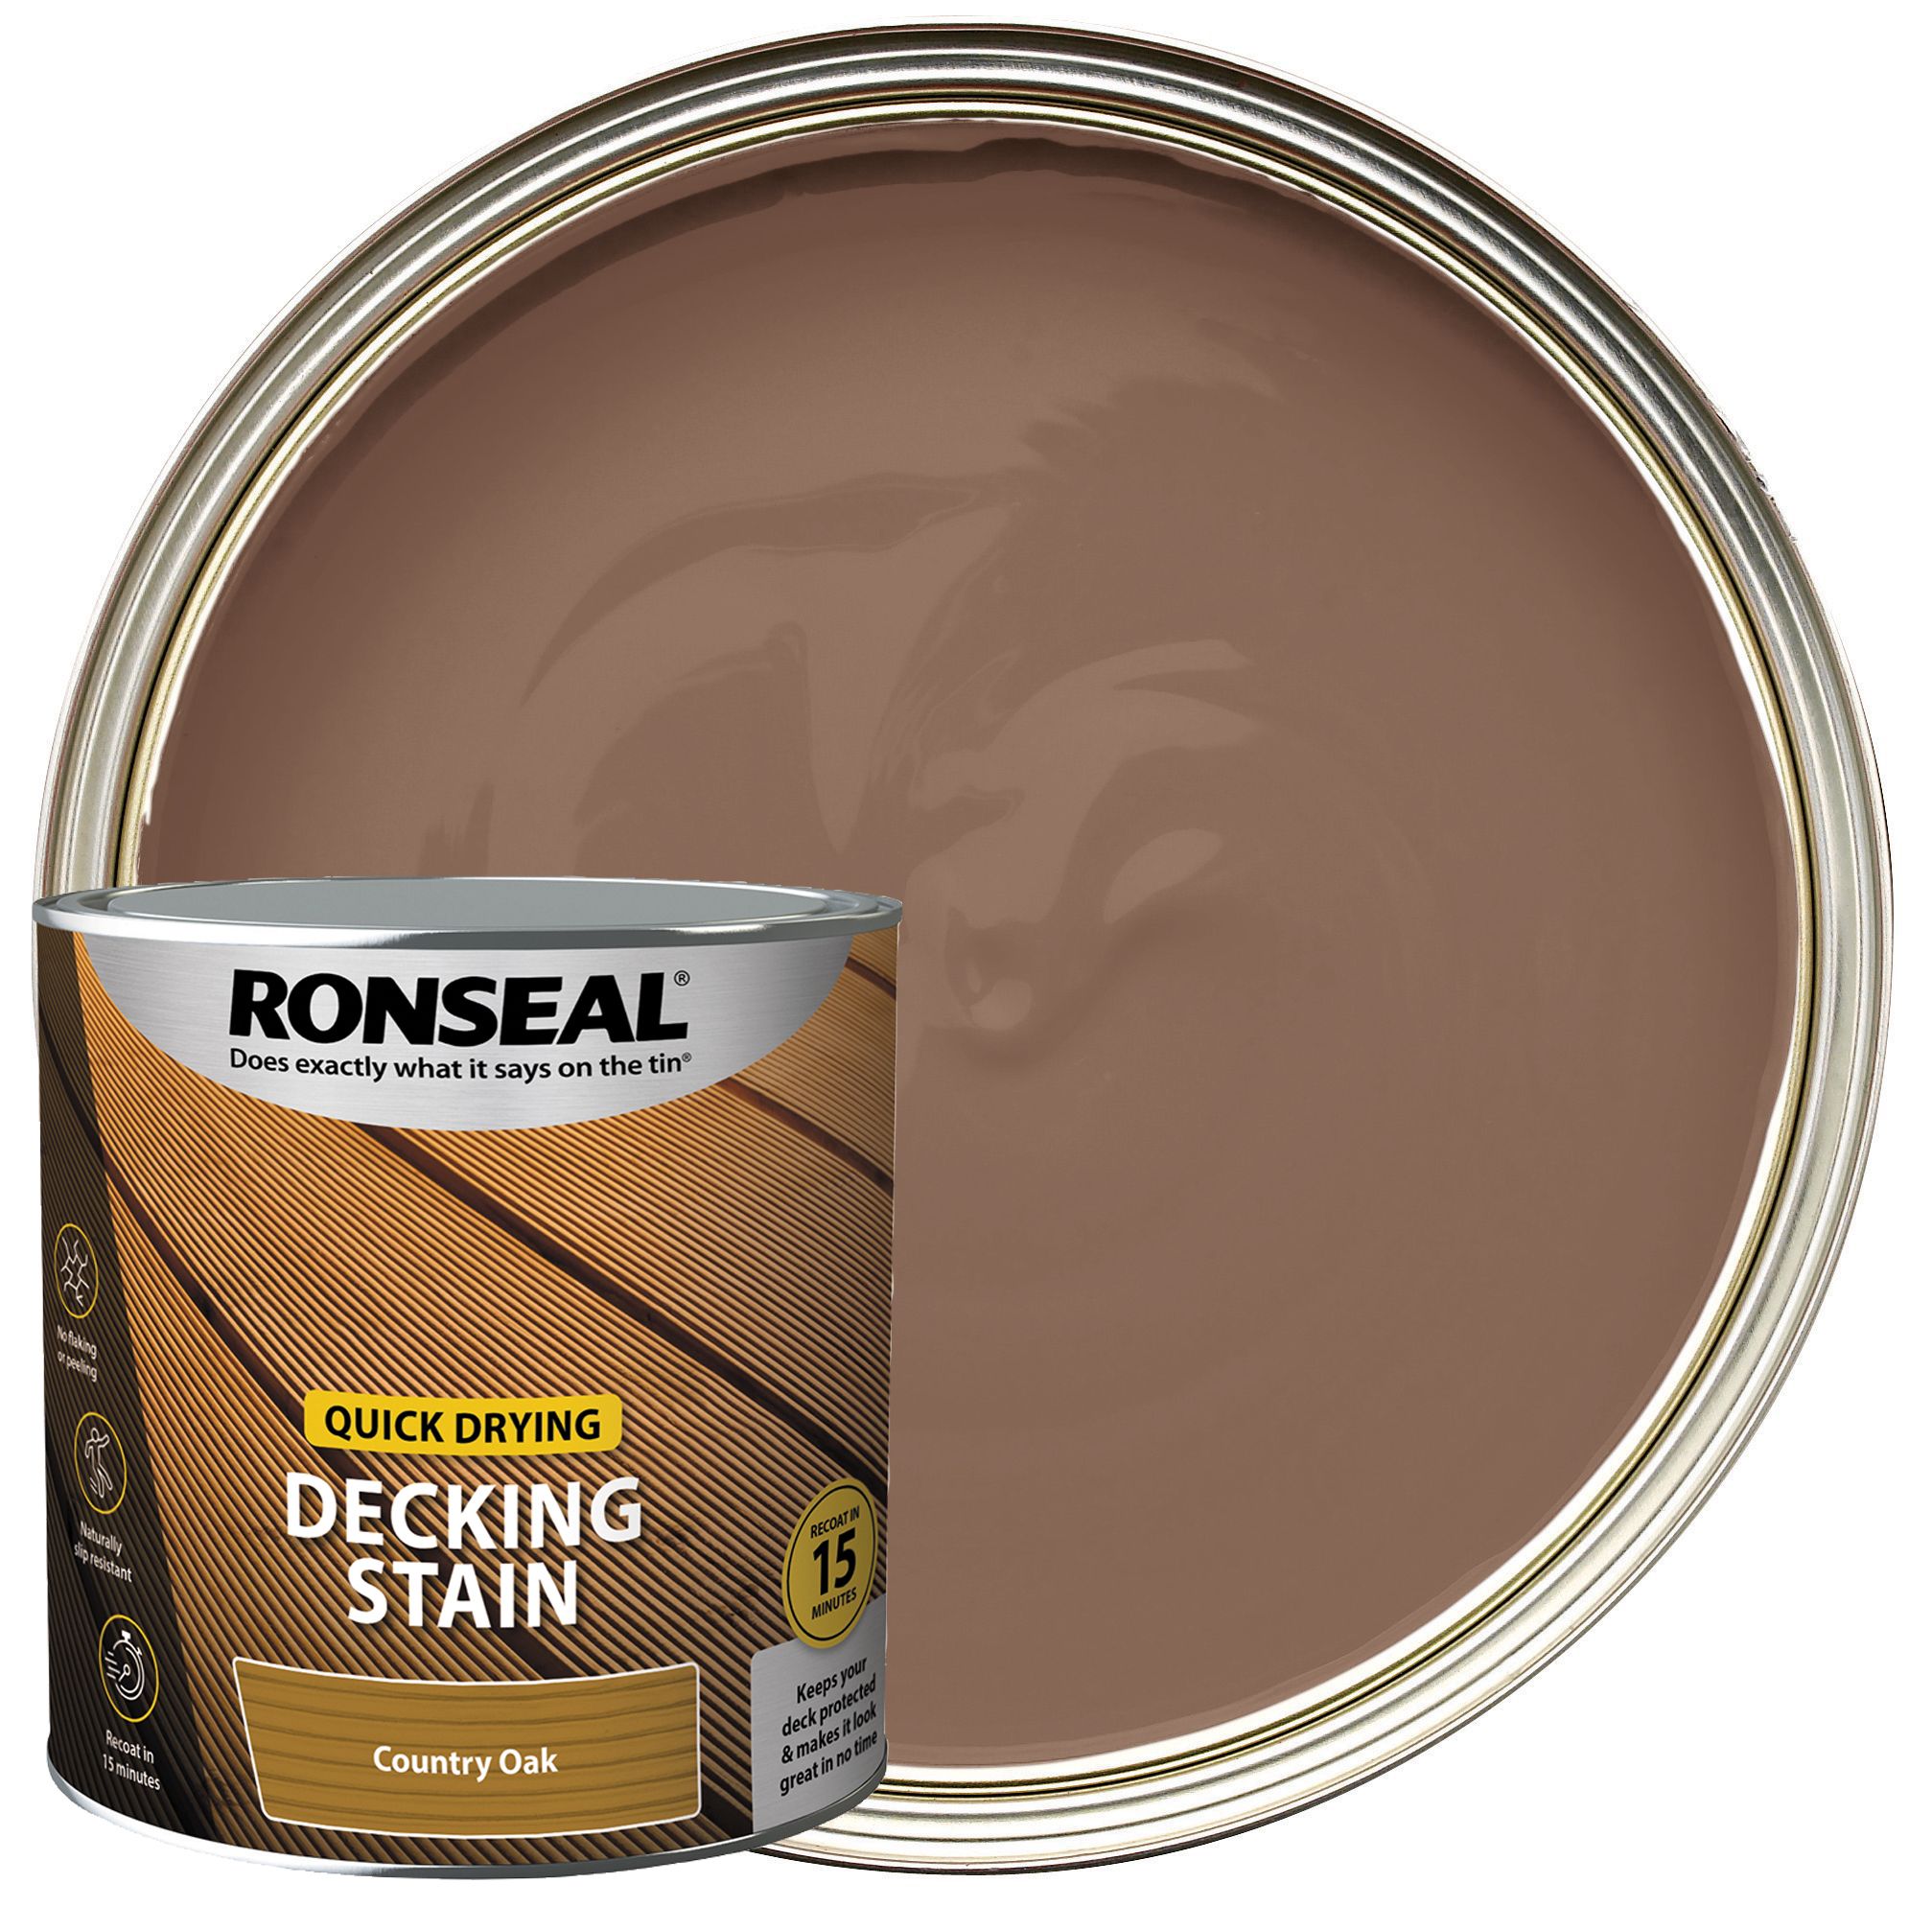 Image of Ronseal Country Oak Quick Drying Decking Stain - 2.5L